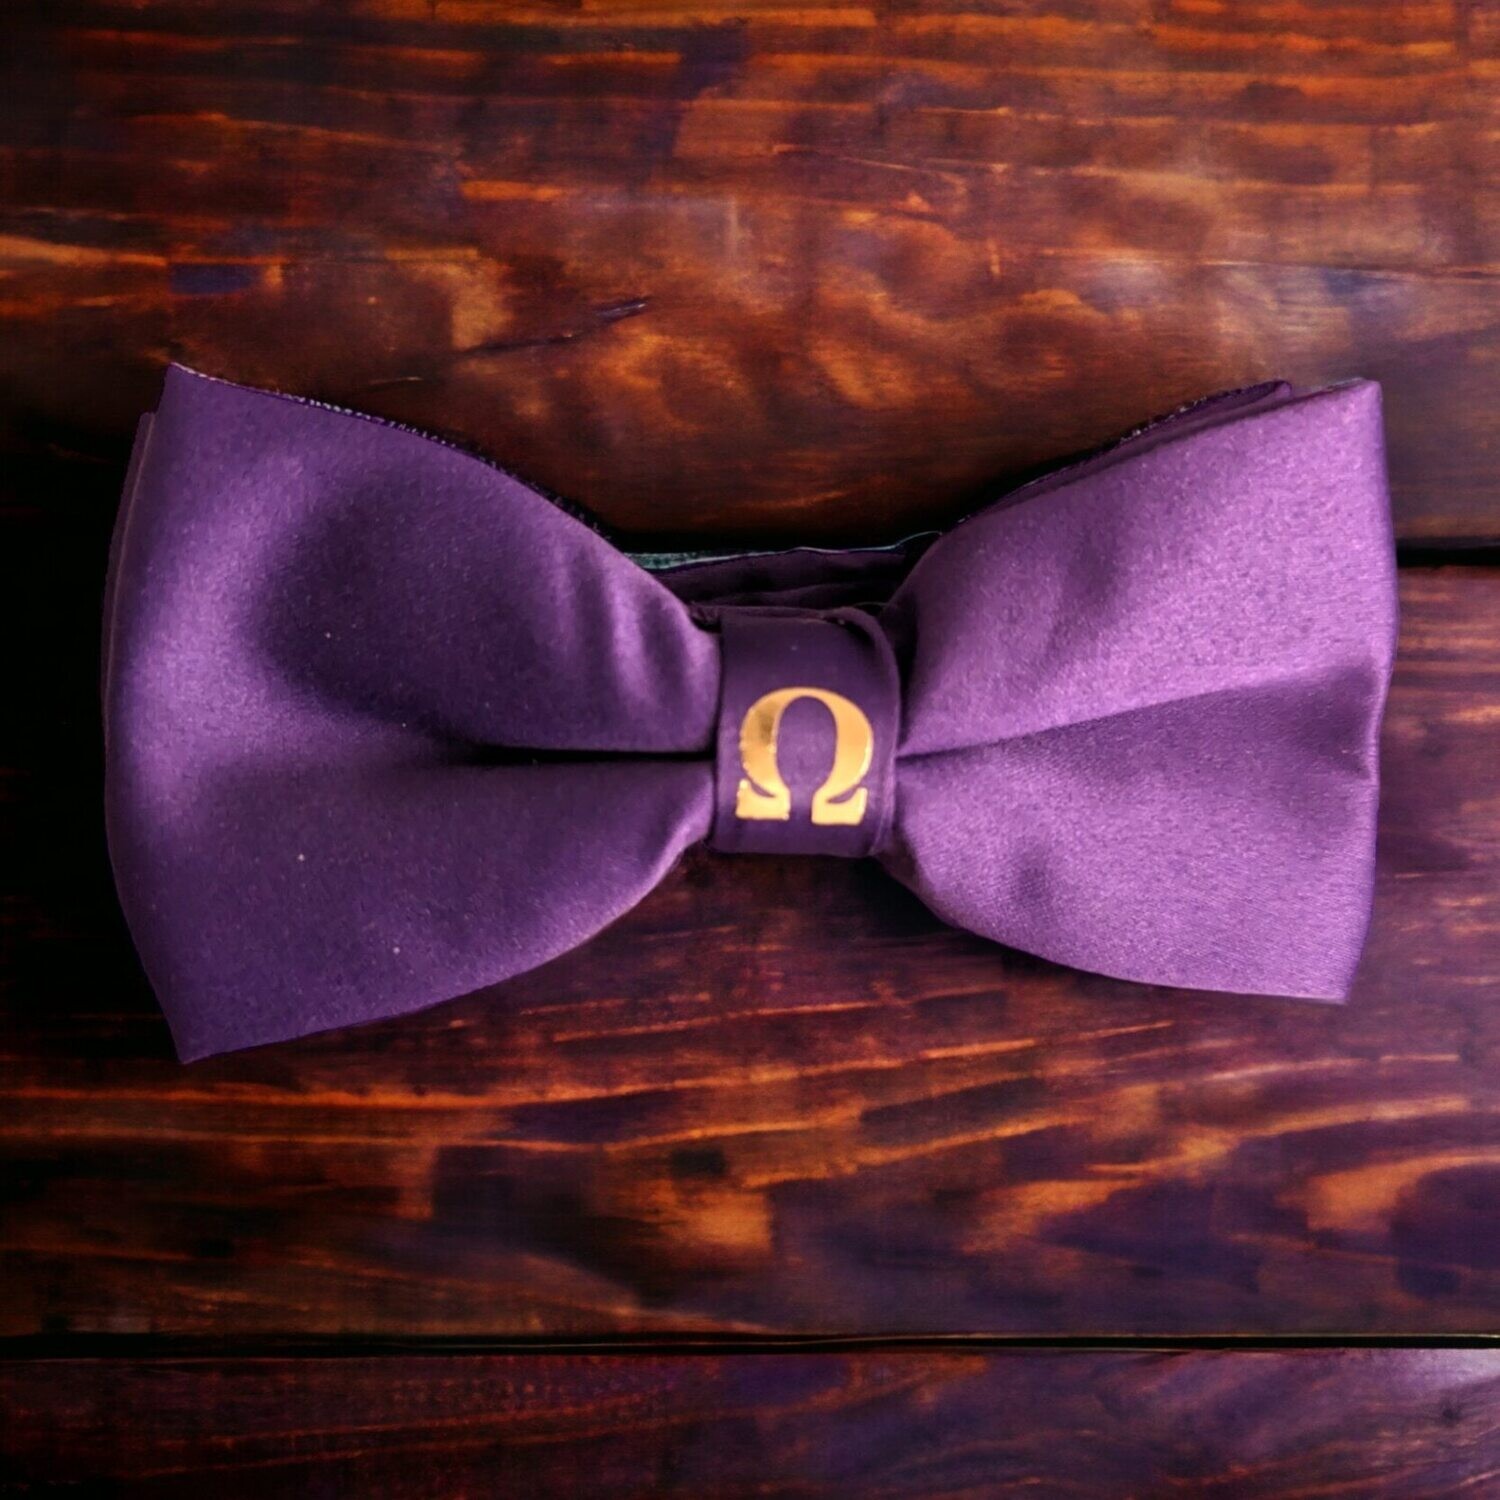 Purple Omega Psi Phi-inspired Bow Tie